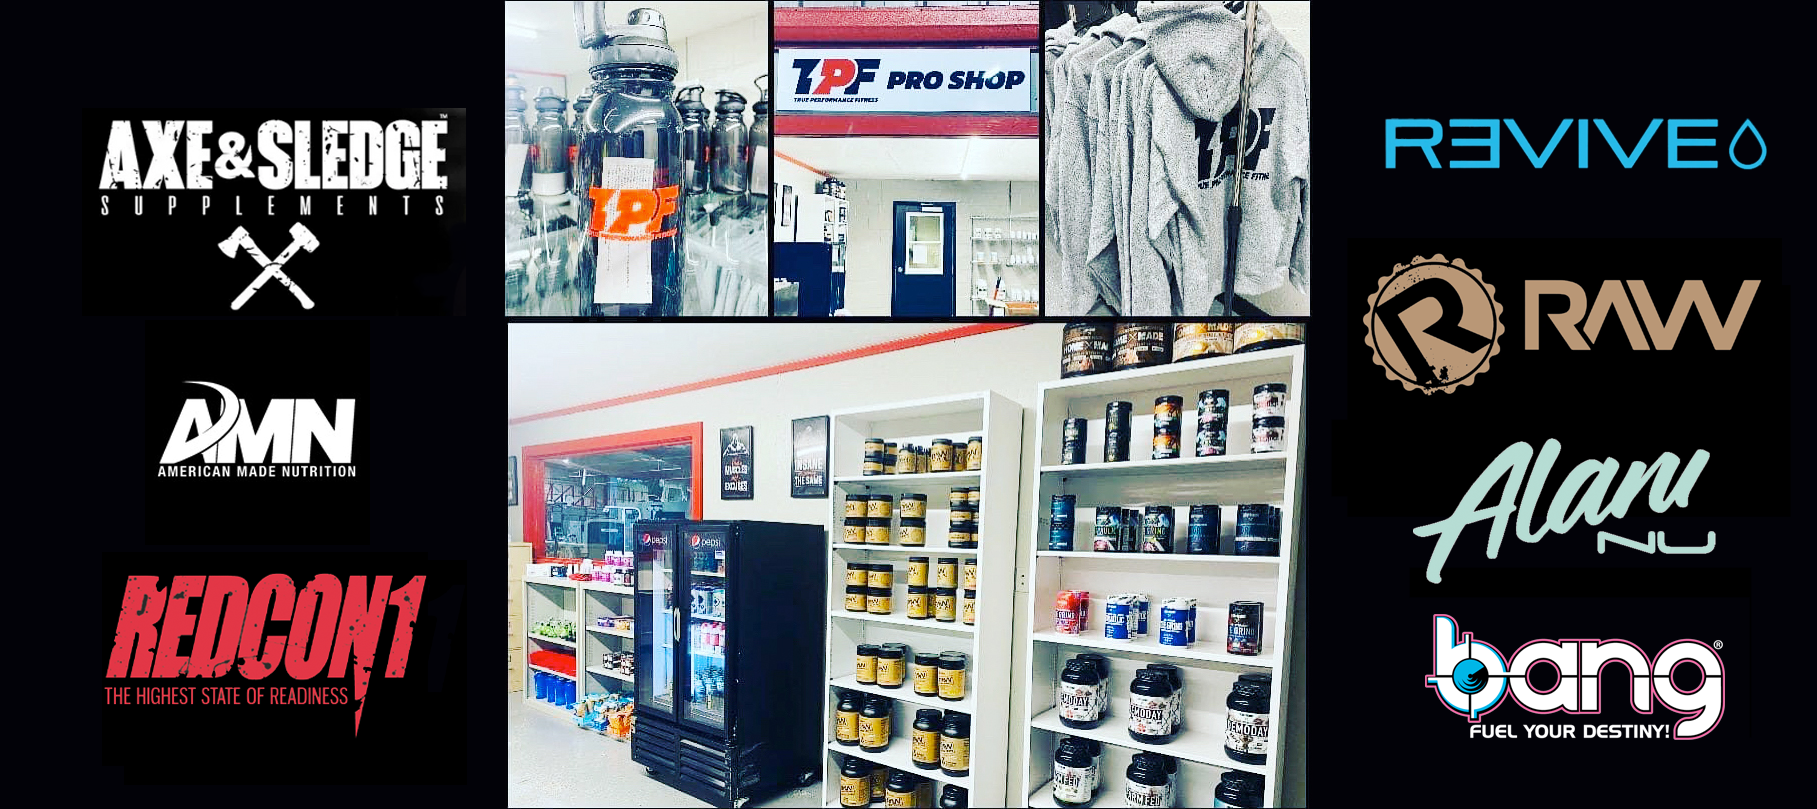 Pro Shop stocked with Supplements from Axe & Sledge, RAW, Revive, and AMN. Alani Nu and Bang energy drinks.